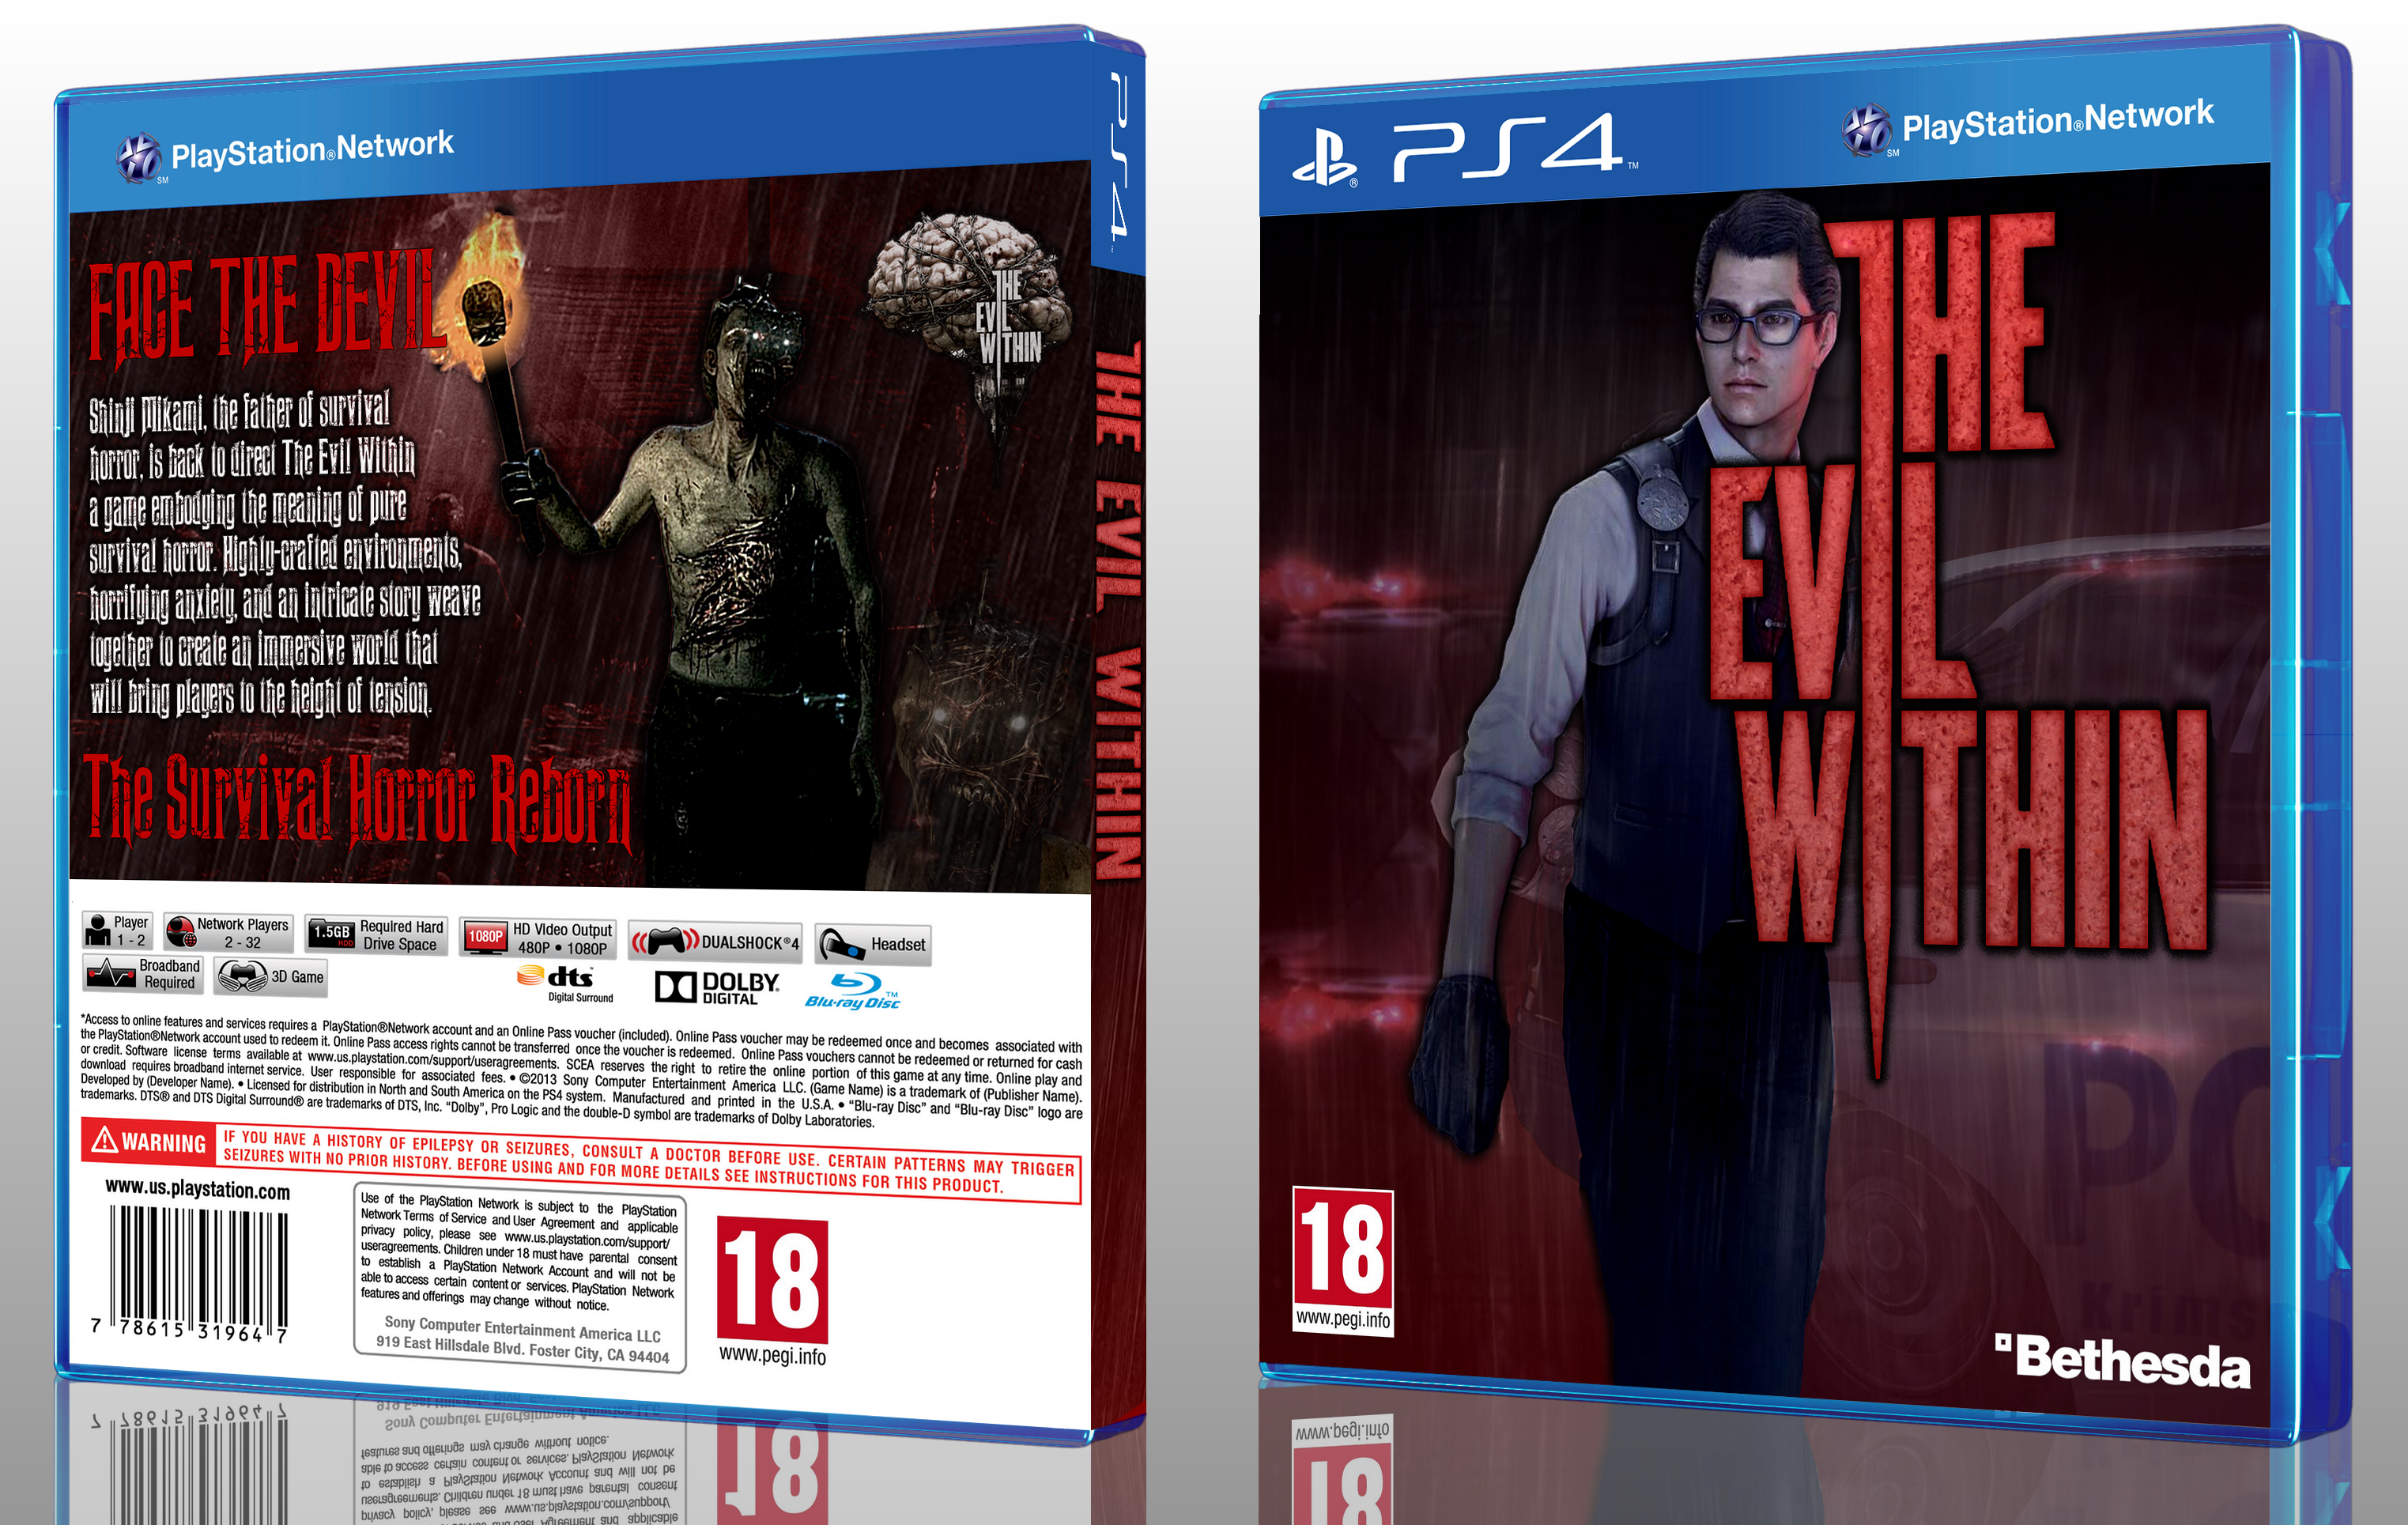 The evil within шкафчики